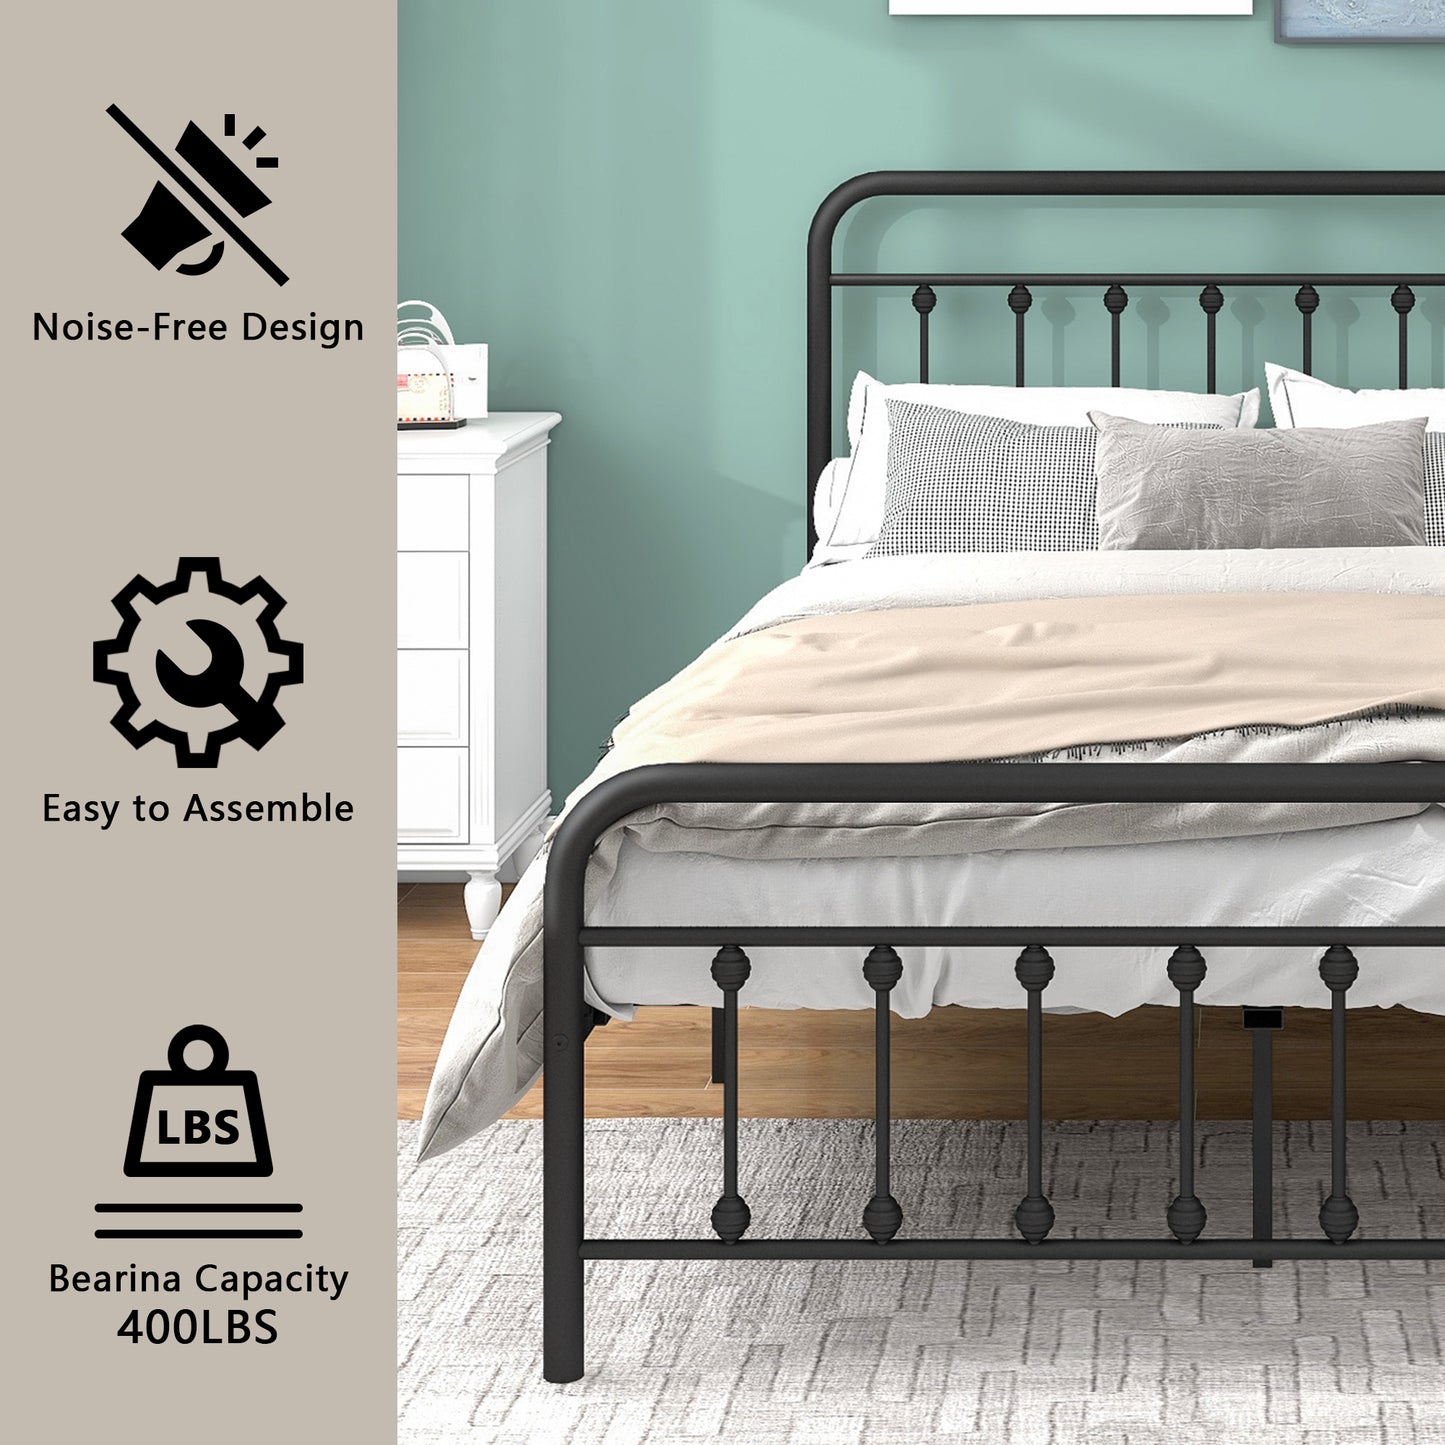 SYNGAR Platform Bed Frame Full Size with Vintage Headboard and Footboard, New Upgraded Metal Legs Support, No Box Spring Needed, Heavy Duty Steel Full Bed Frame with 500LBS Weight Capacity, Black